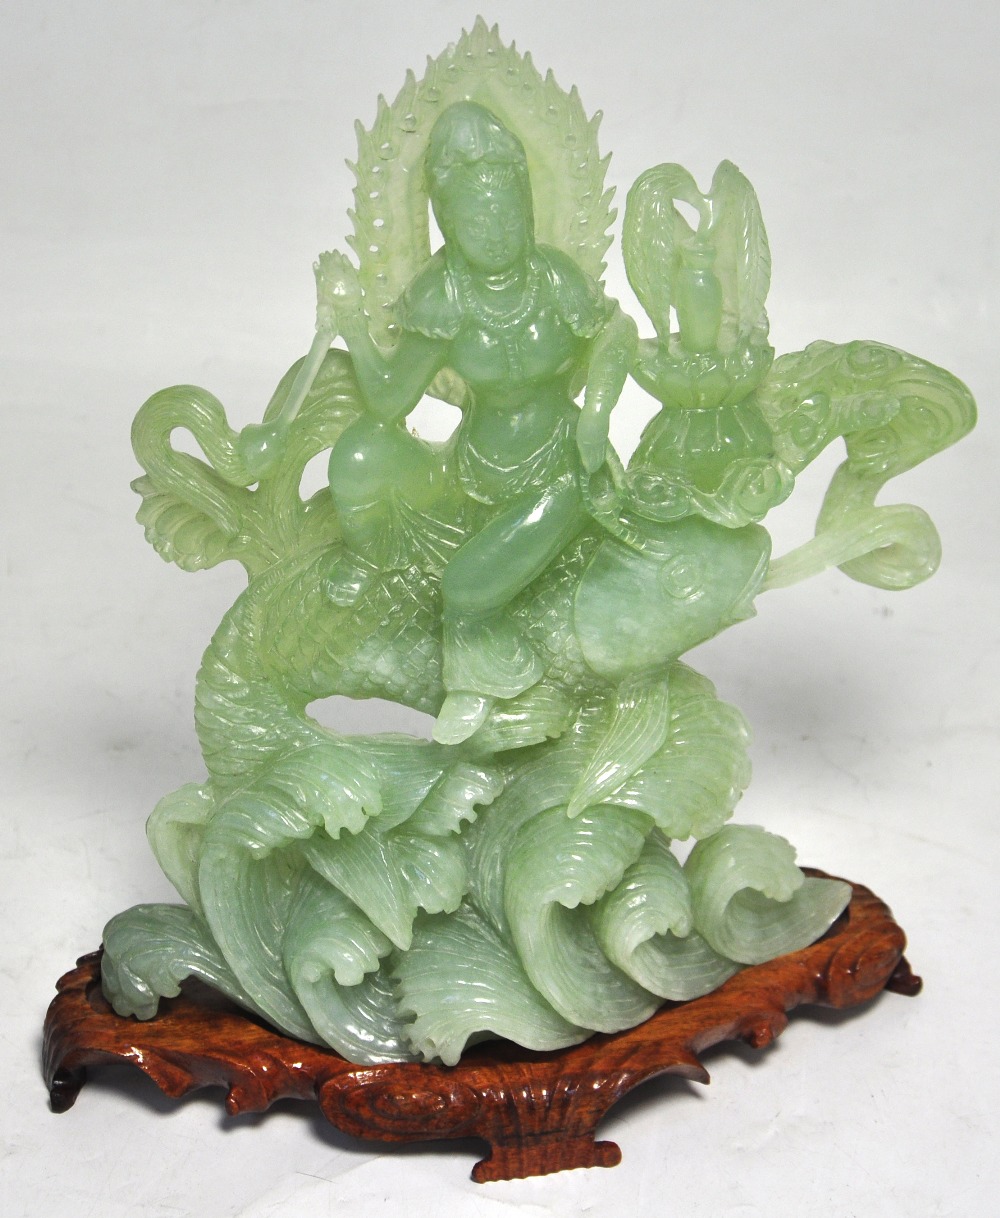 A polished green hardstone figure of a g